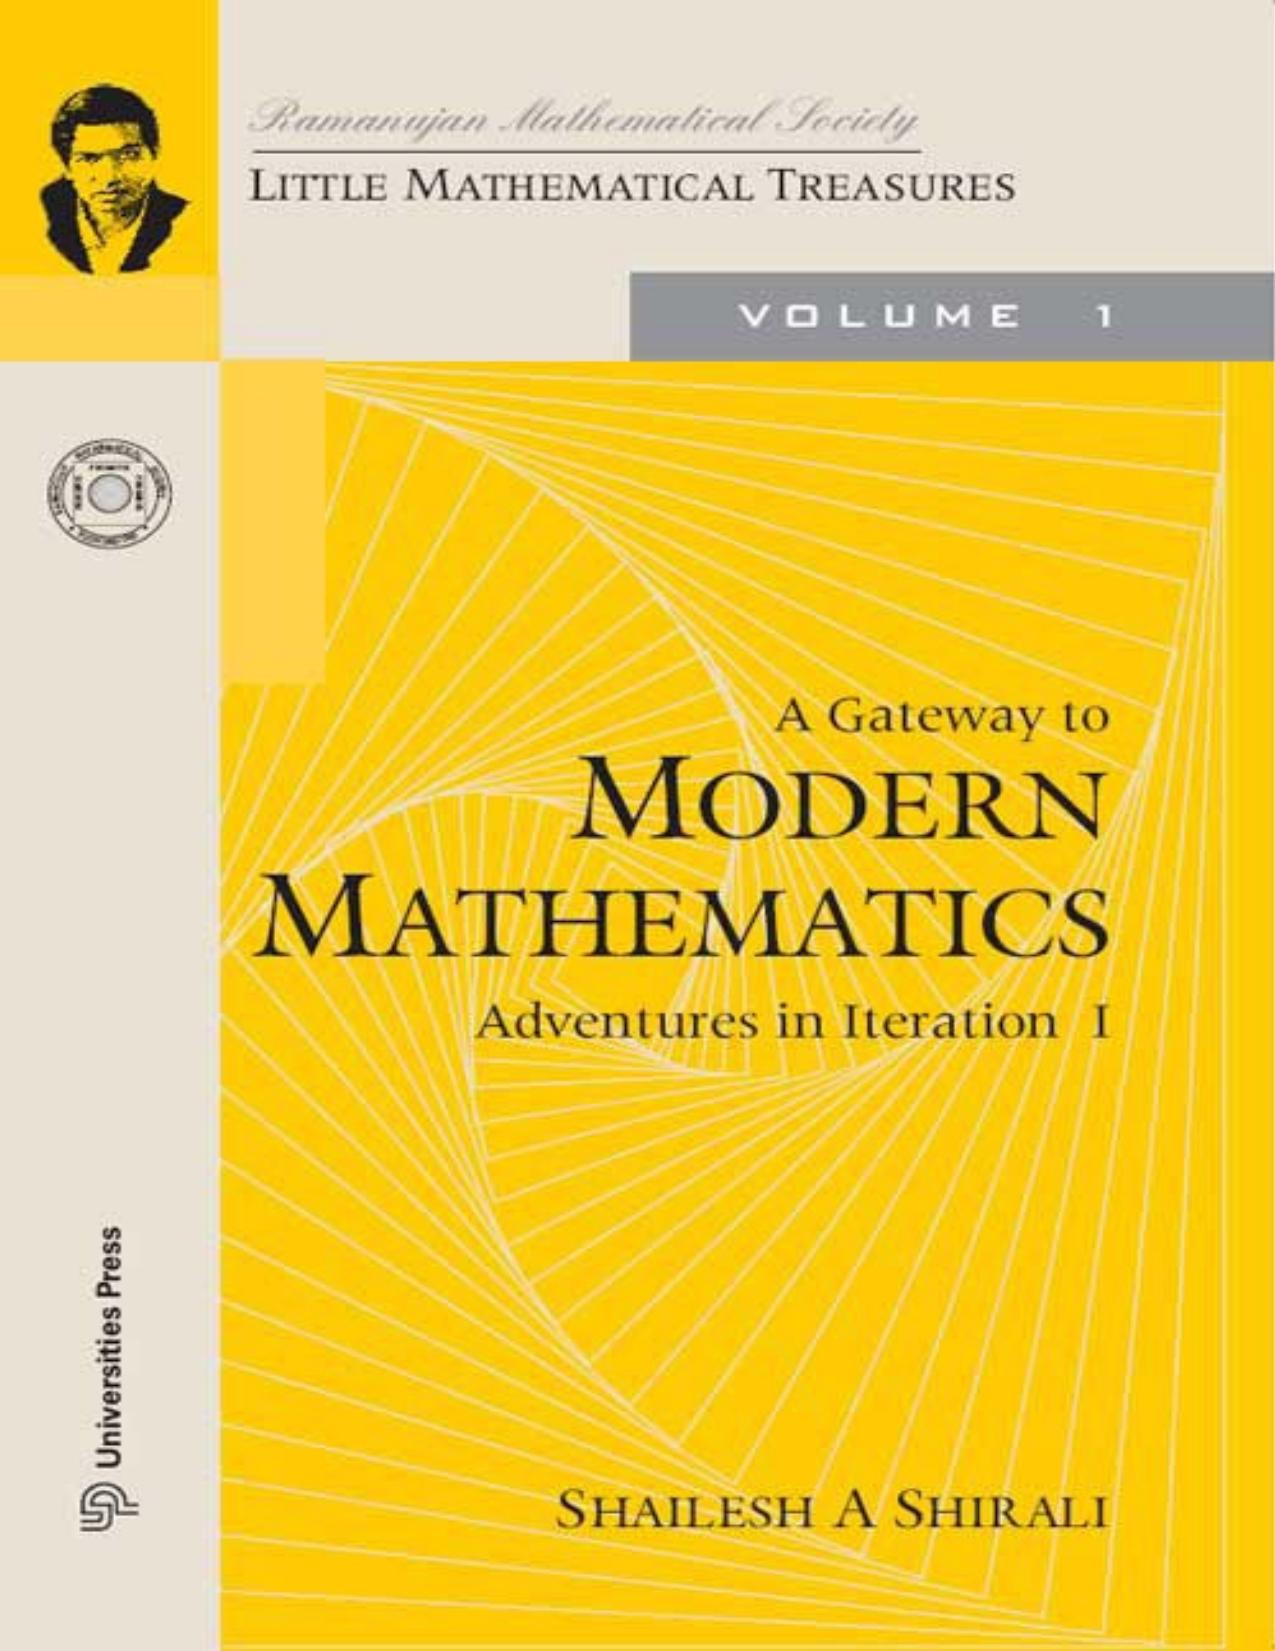 A Gateway to Modern Mathematics: Adventures in Iteration I (Little Mathematical Treasures)